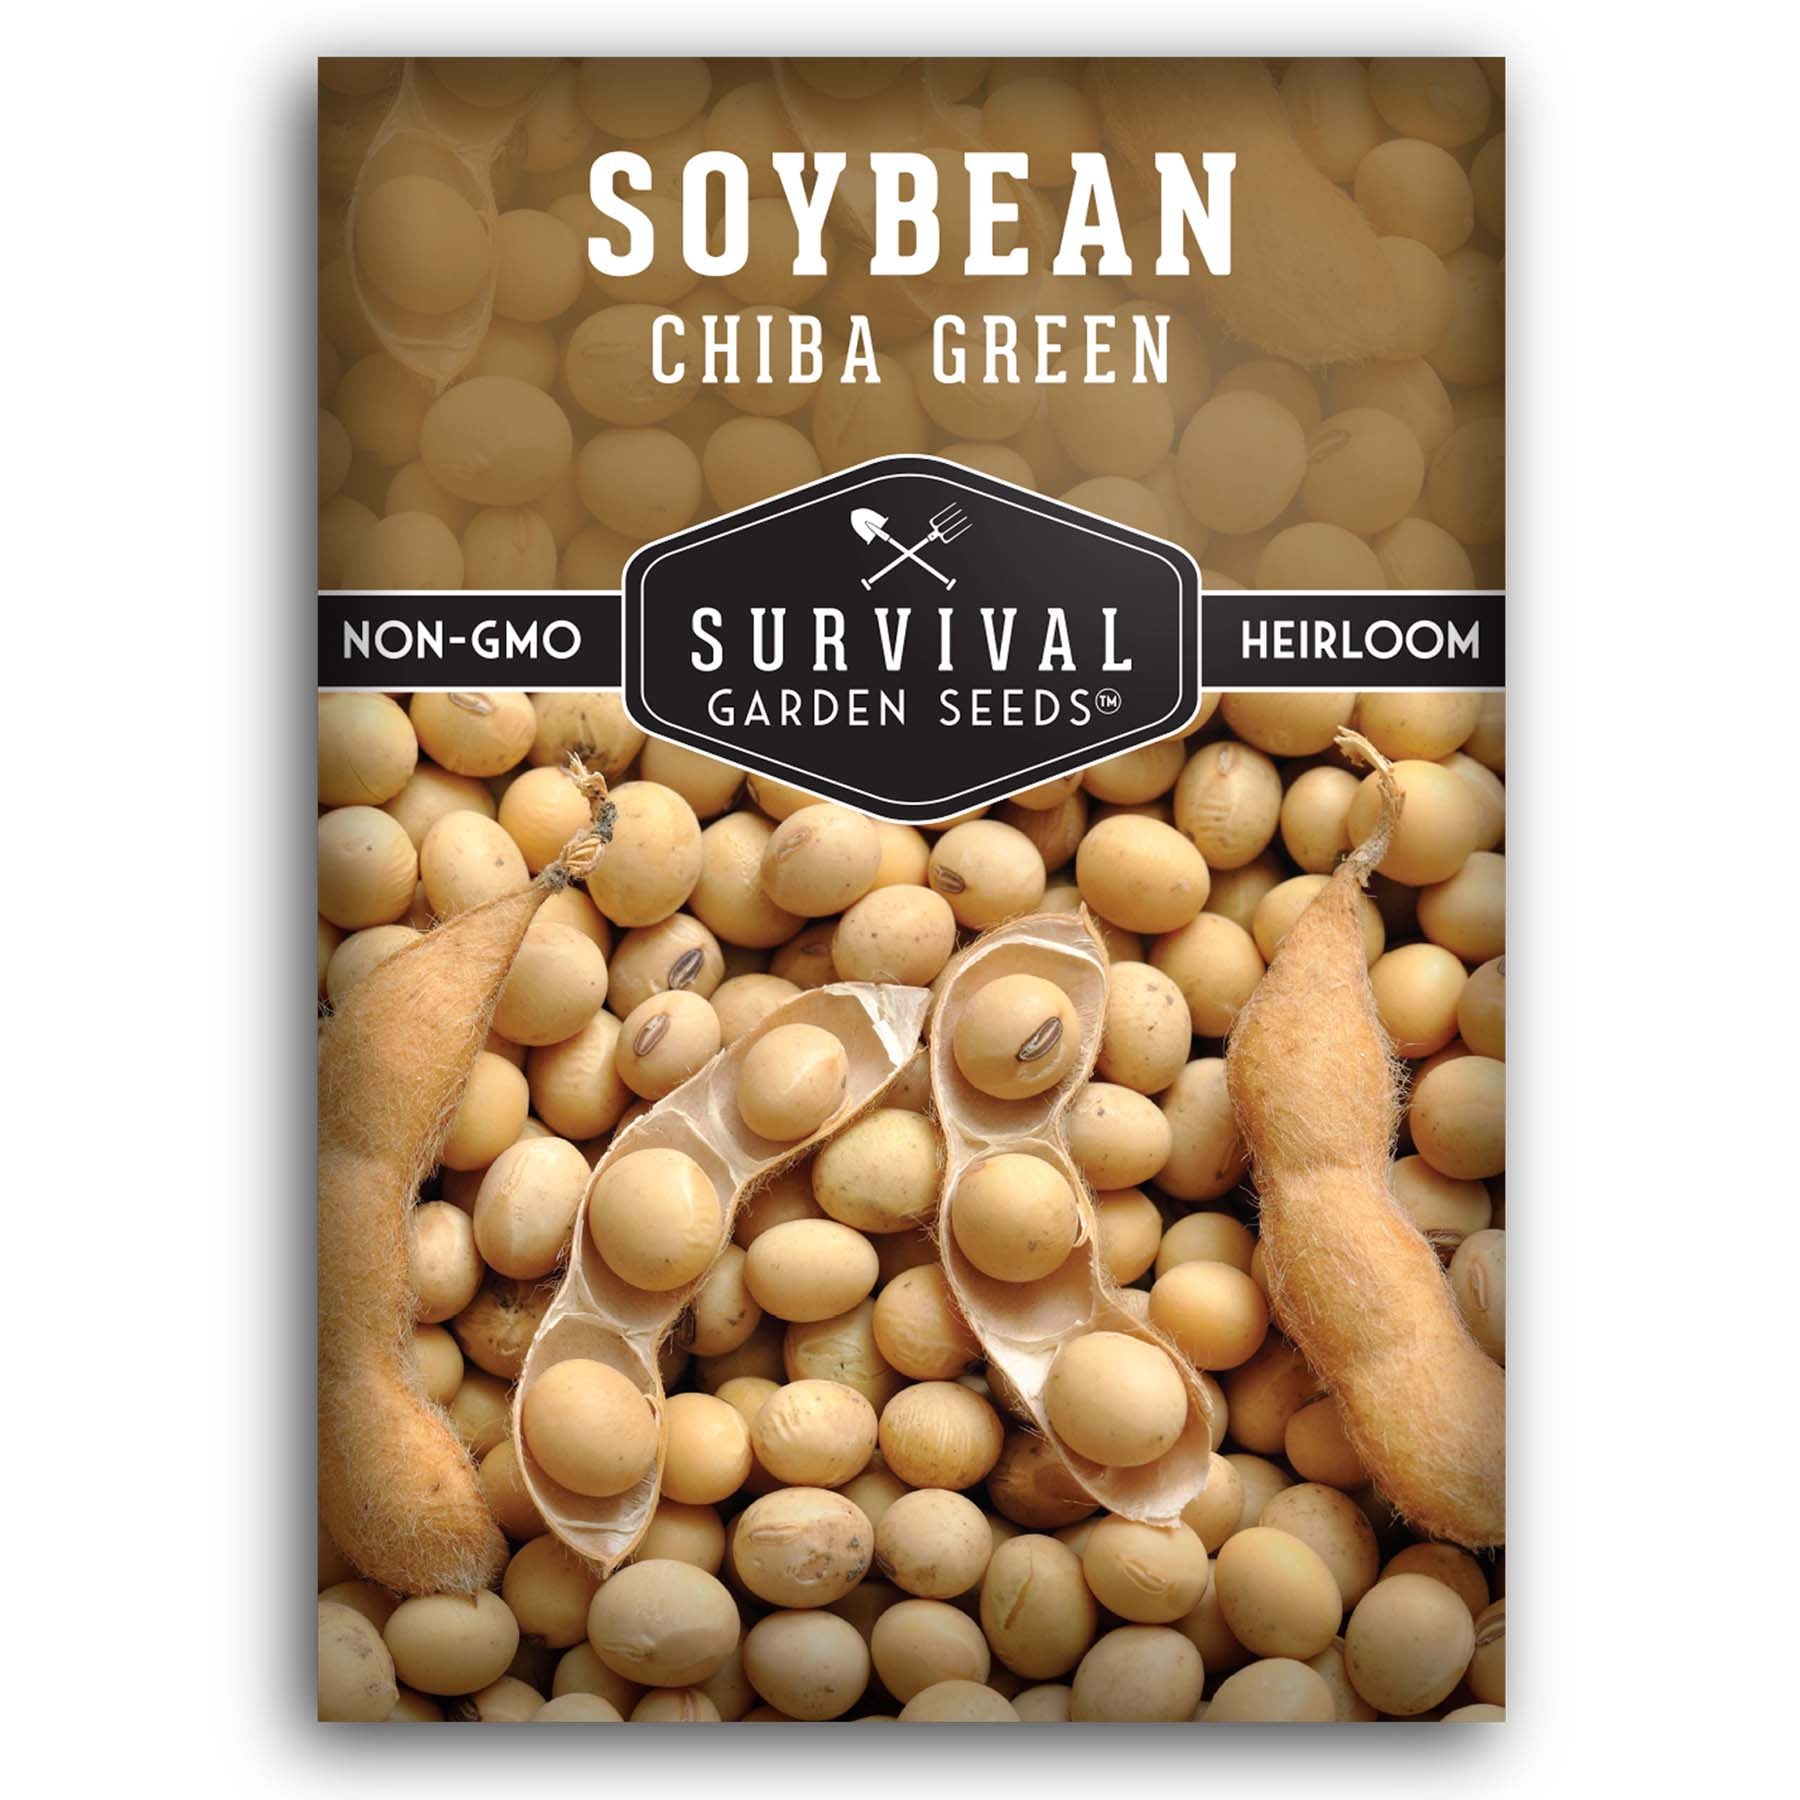 Chiba Green Soybeans for Planting